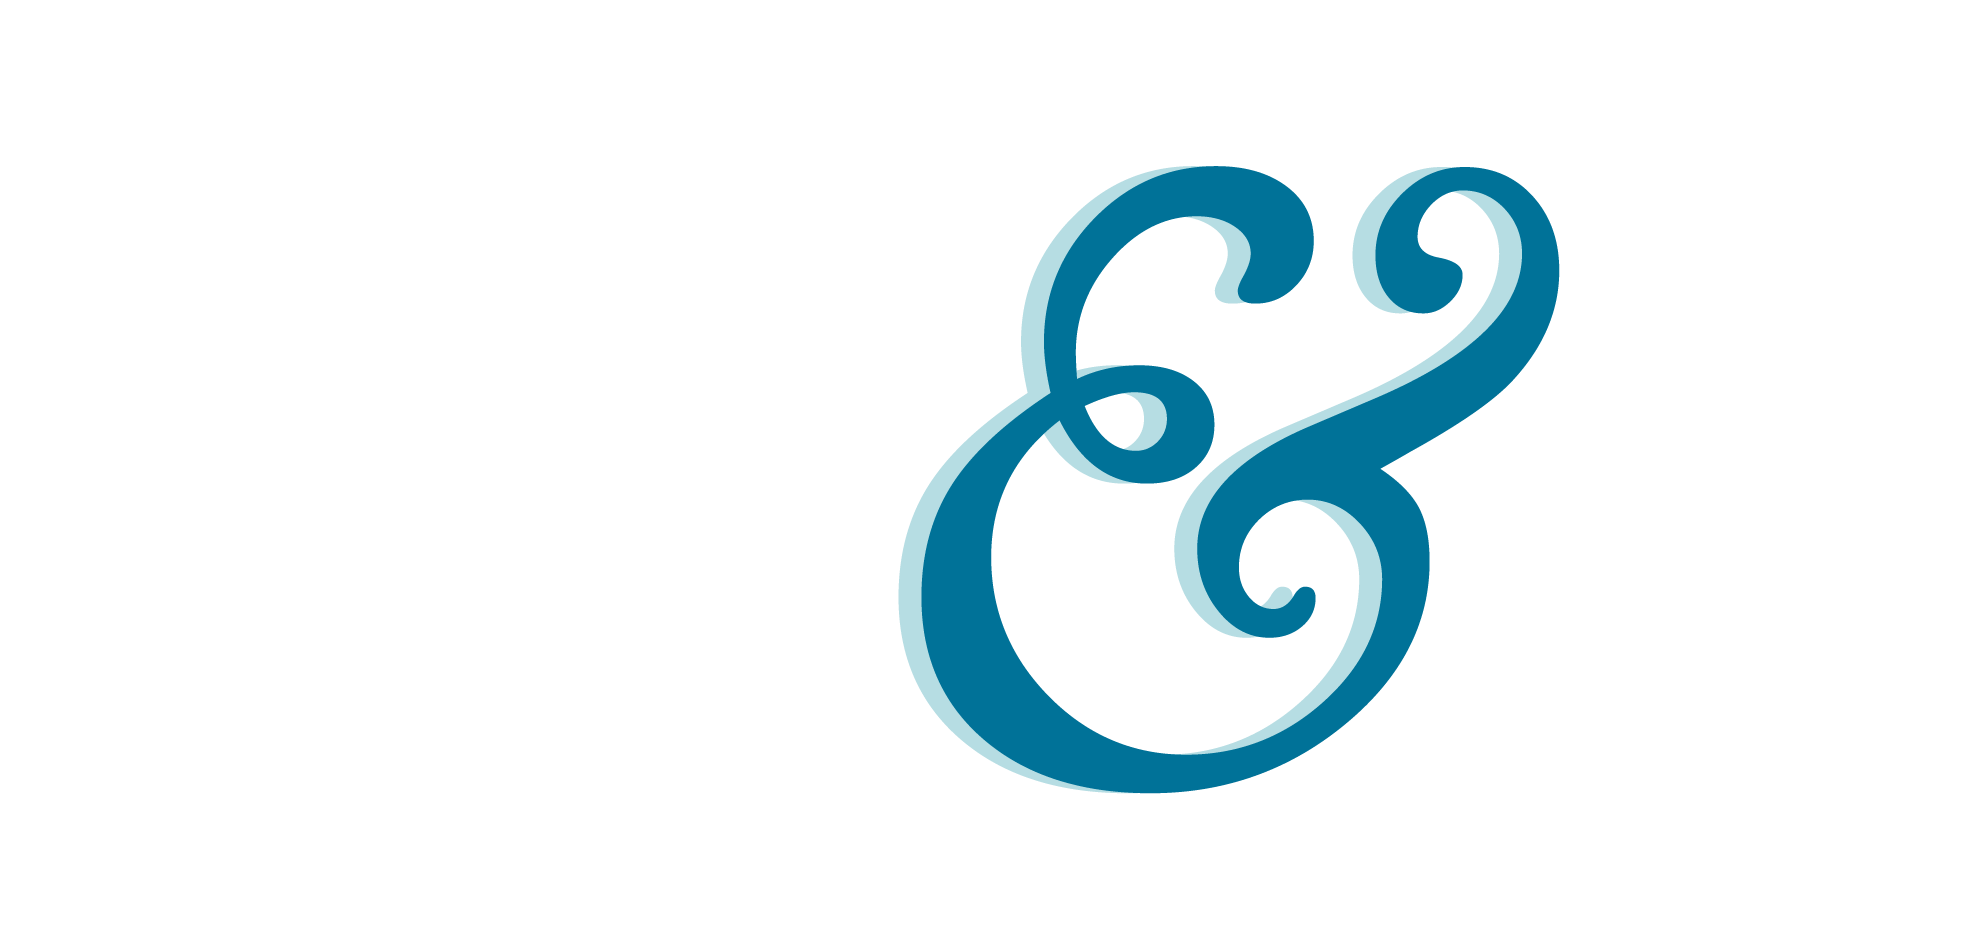 Abrevity Logo - Brevity & Wit. Strategy and design for change